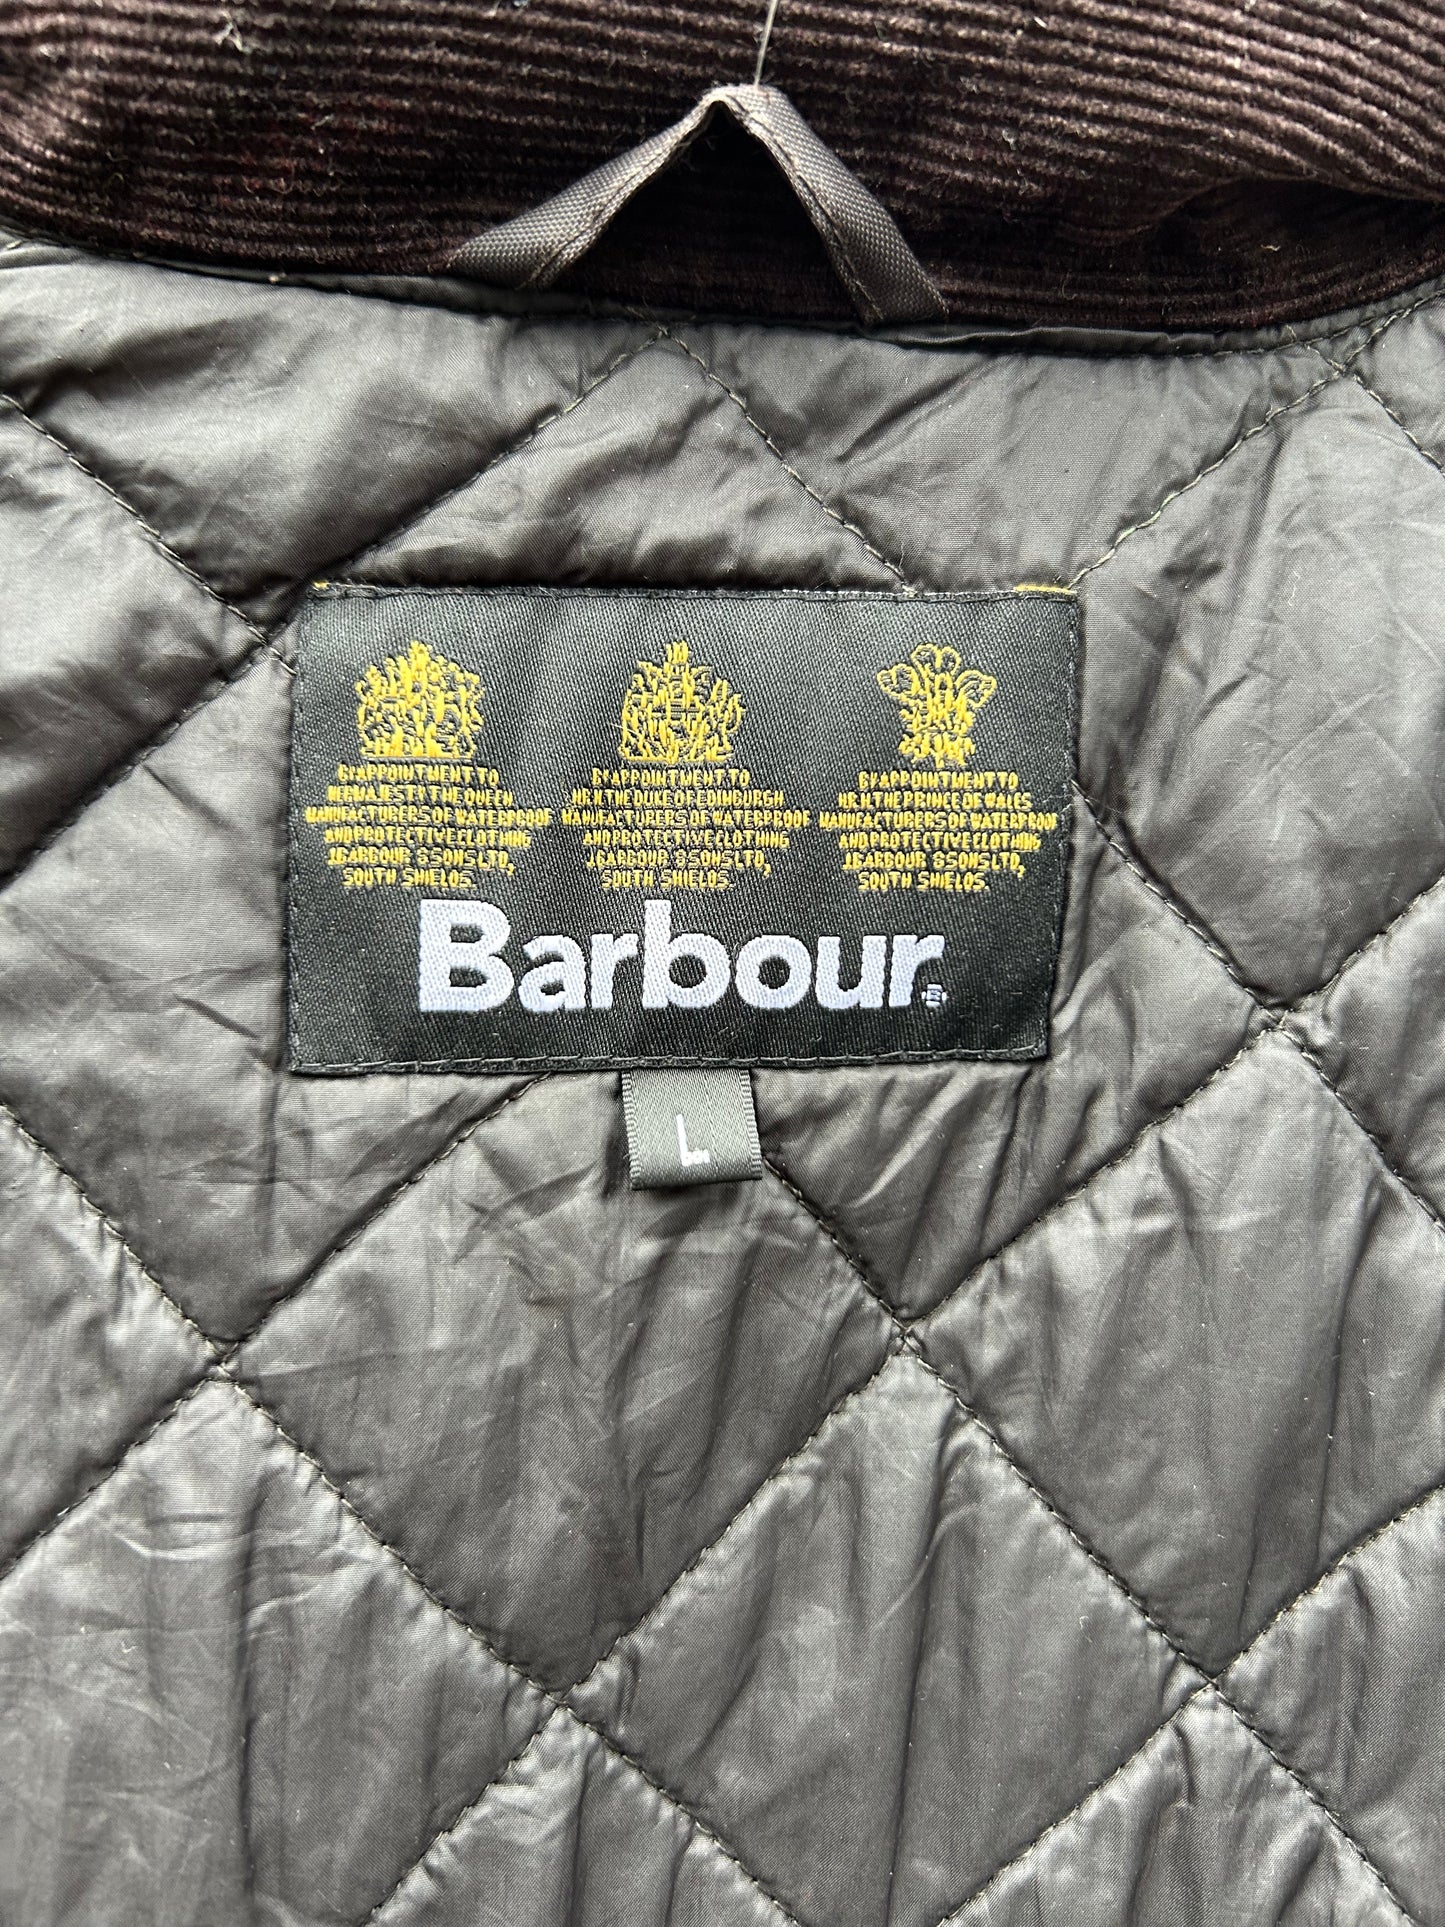 Giacca Barbour  Sapper  ruggine Large - Man rust waxed jacket size Large